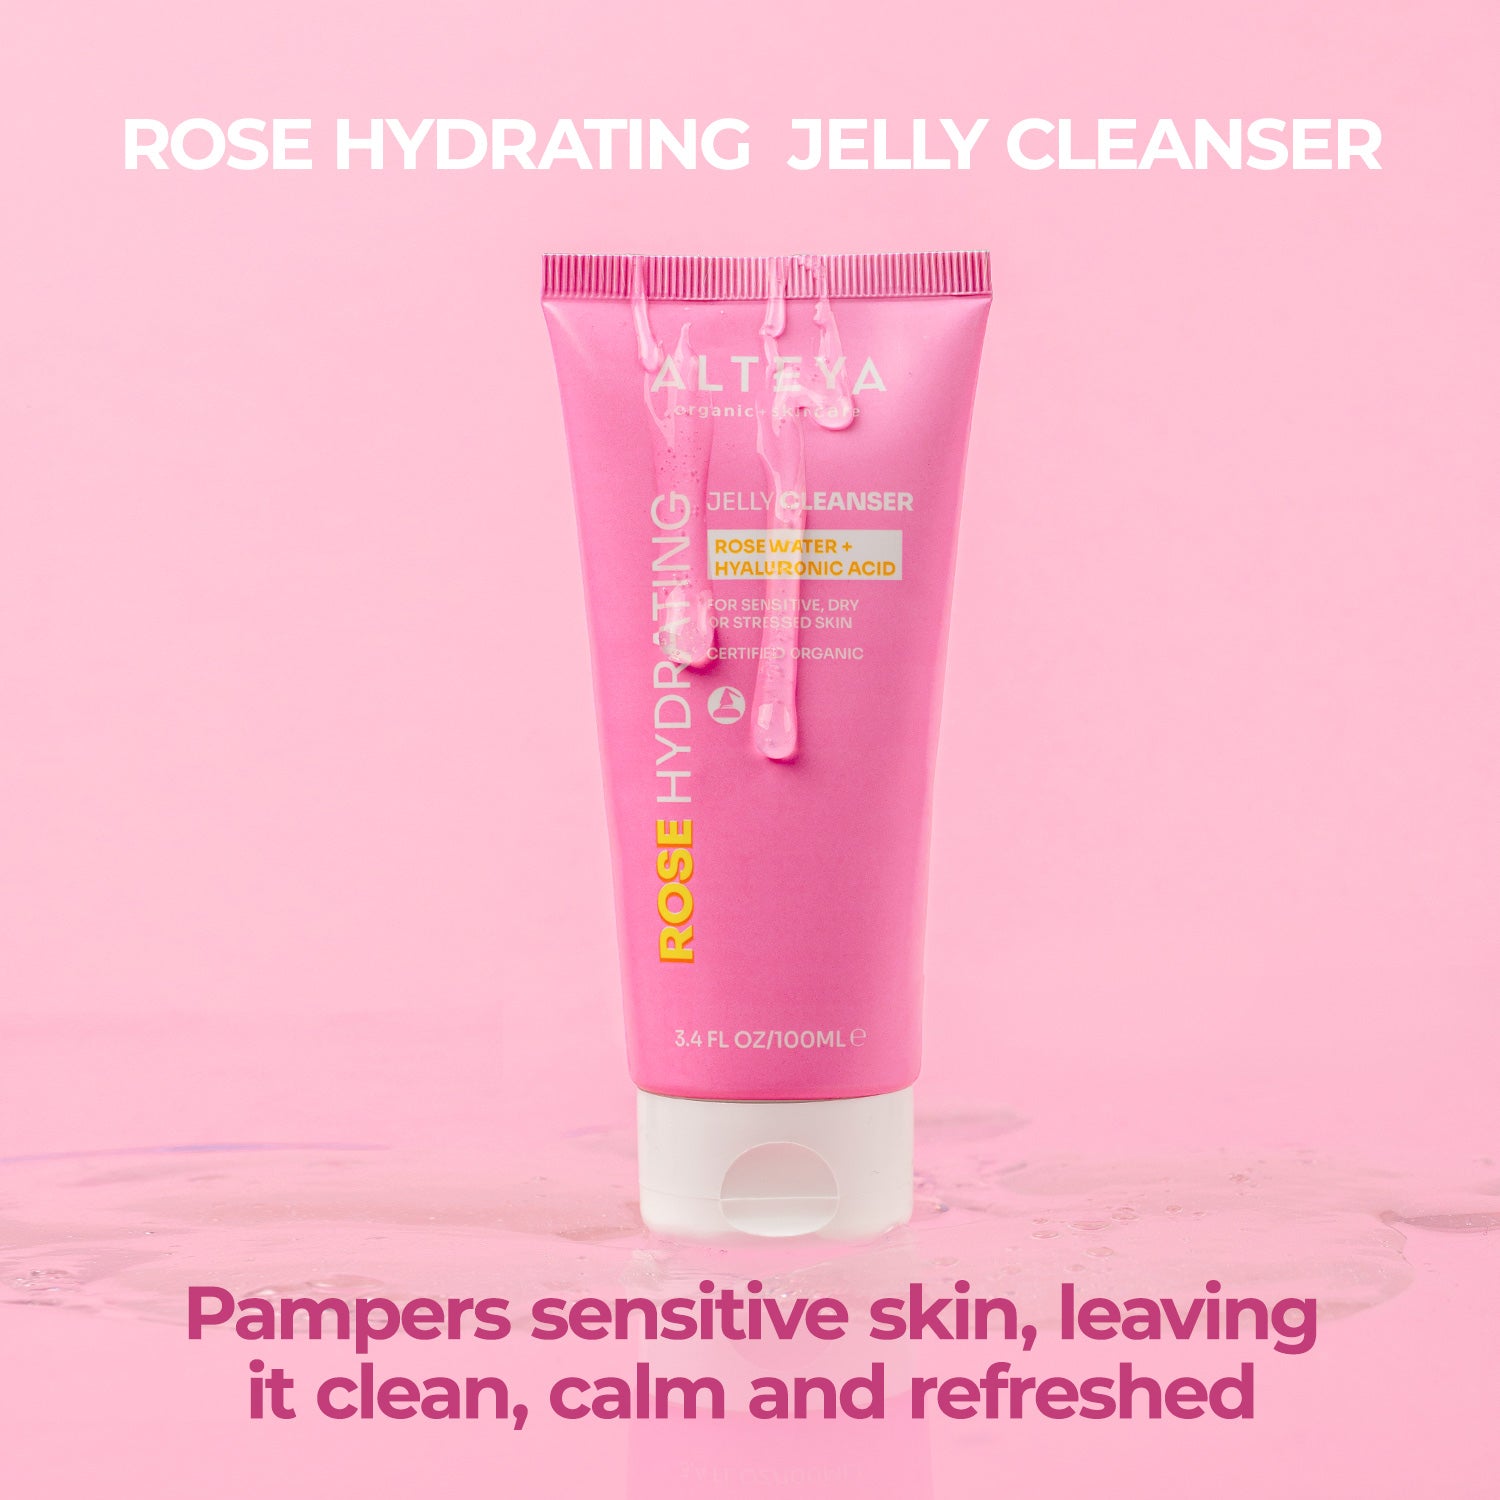 Rose Hydrating Jelly Cleanser